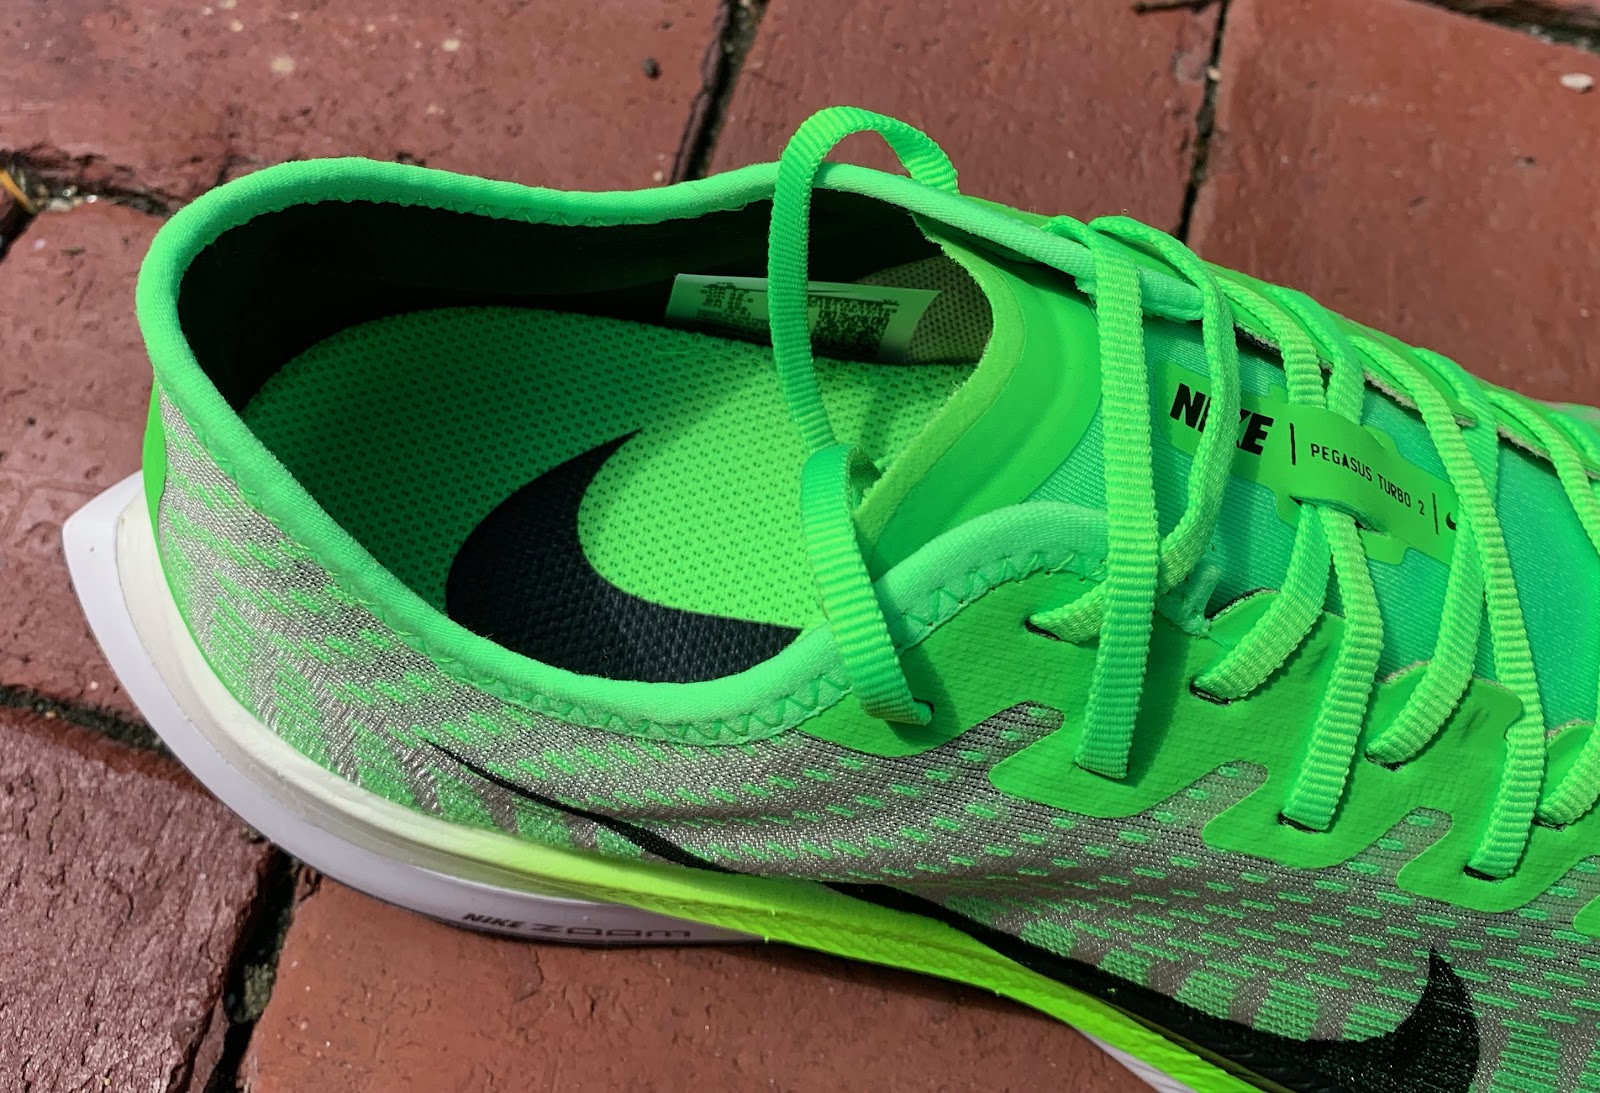 Road Trail Run: NIke Zoom Pegasus 36 Turbo 2 Review: More For Real Turbo  and a Superb Upper